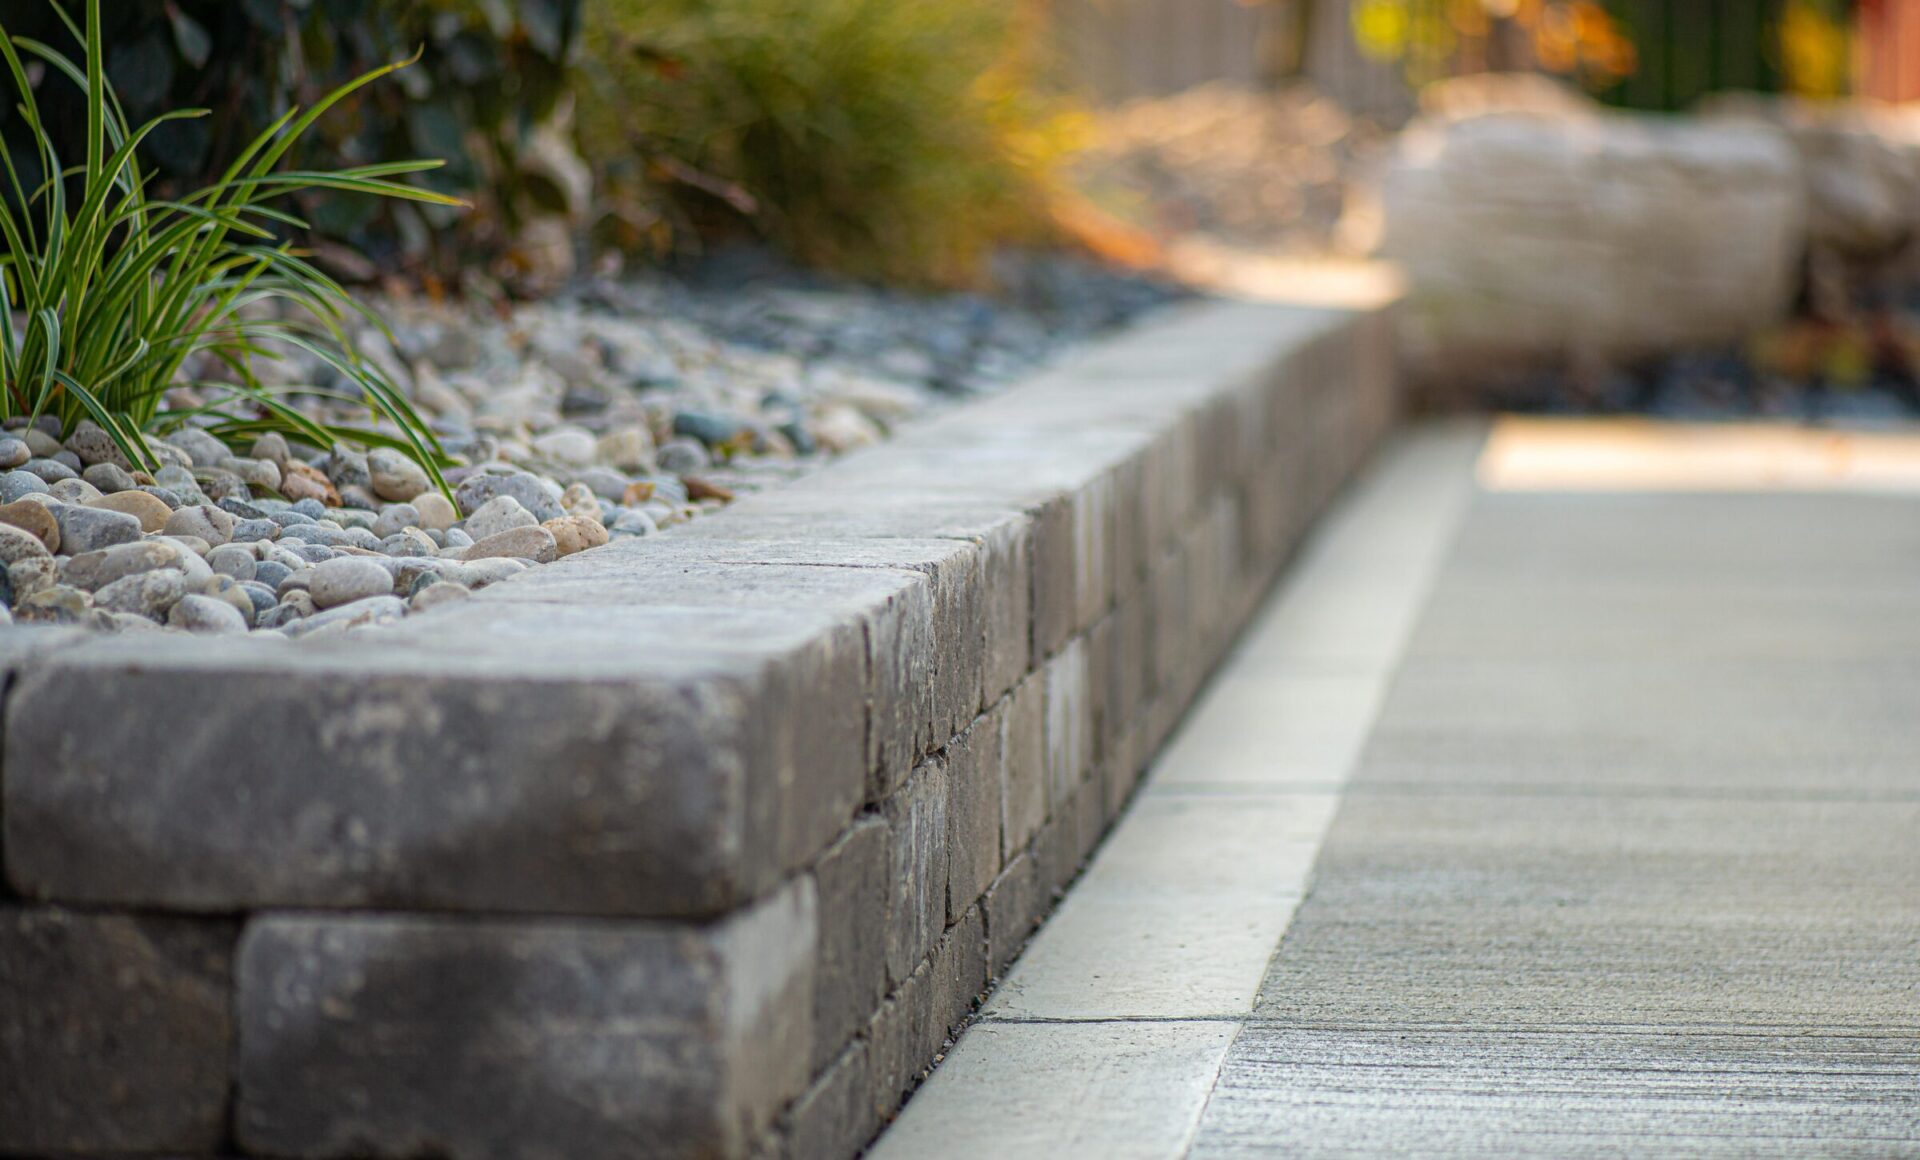 A neatly composed image of a landscaped garden edge, featuring a low brick retaining wall, a gravel bed, some green plants, and a concrete pathway.